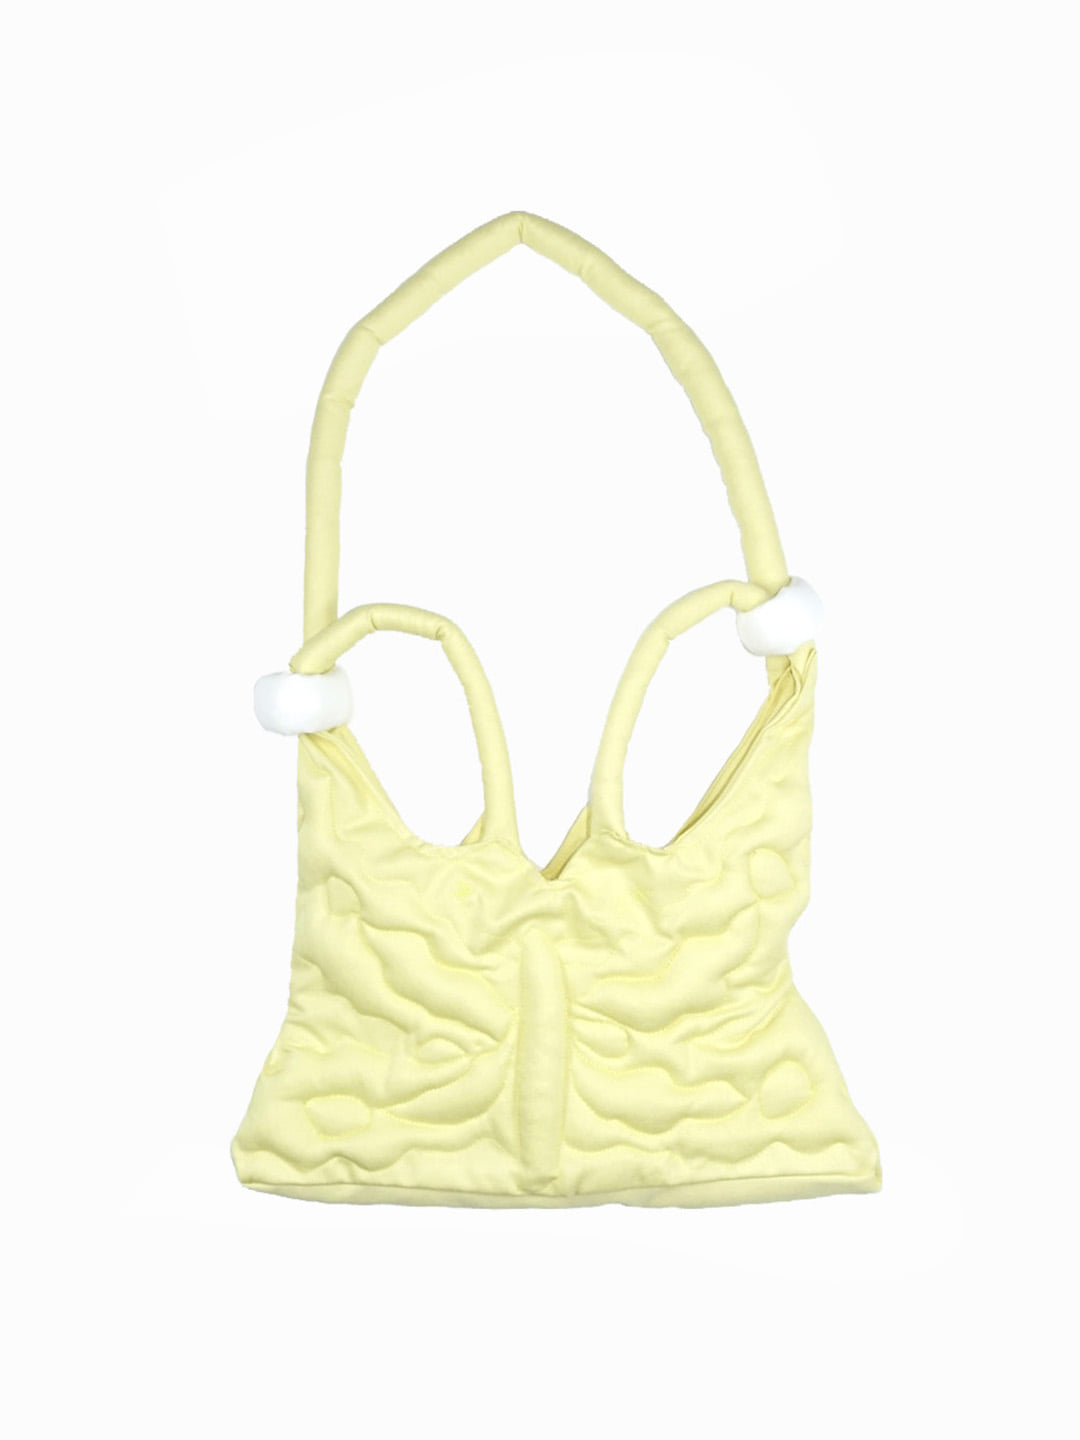 OFF BEAT SWEETClouded yellow butterfly tote